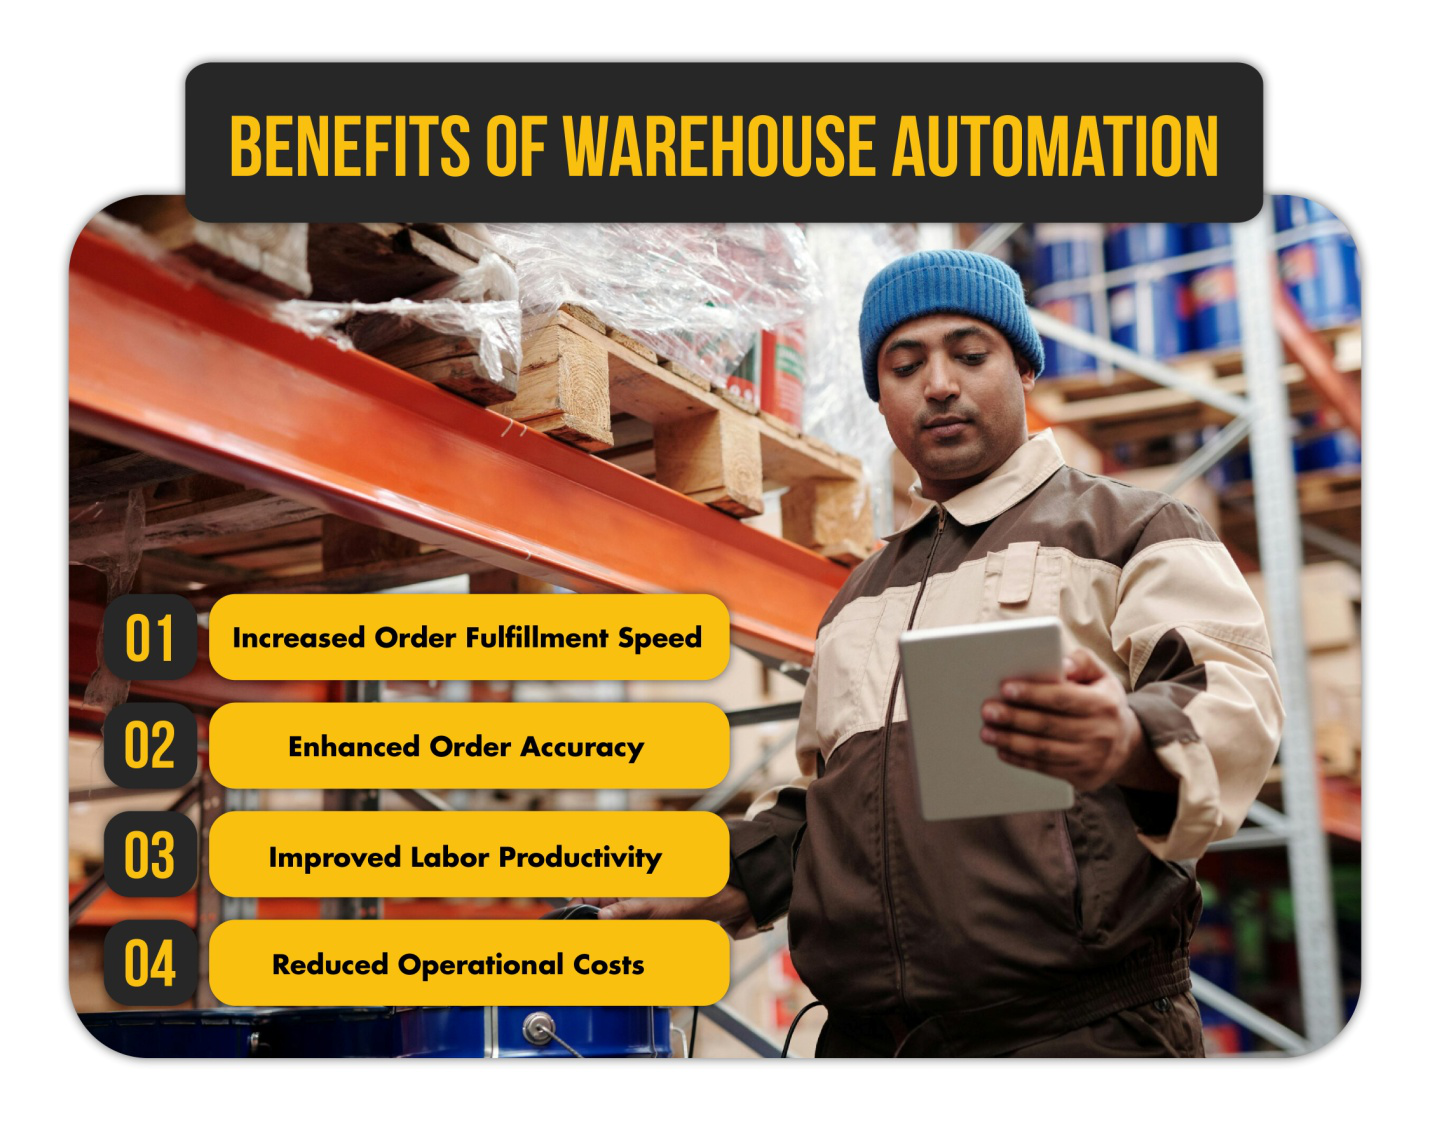 An infographic explaining the benefits of warehouse automation